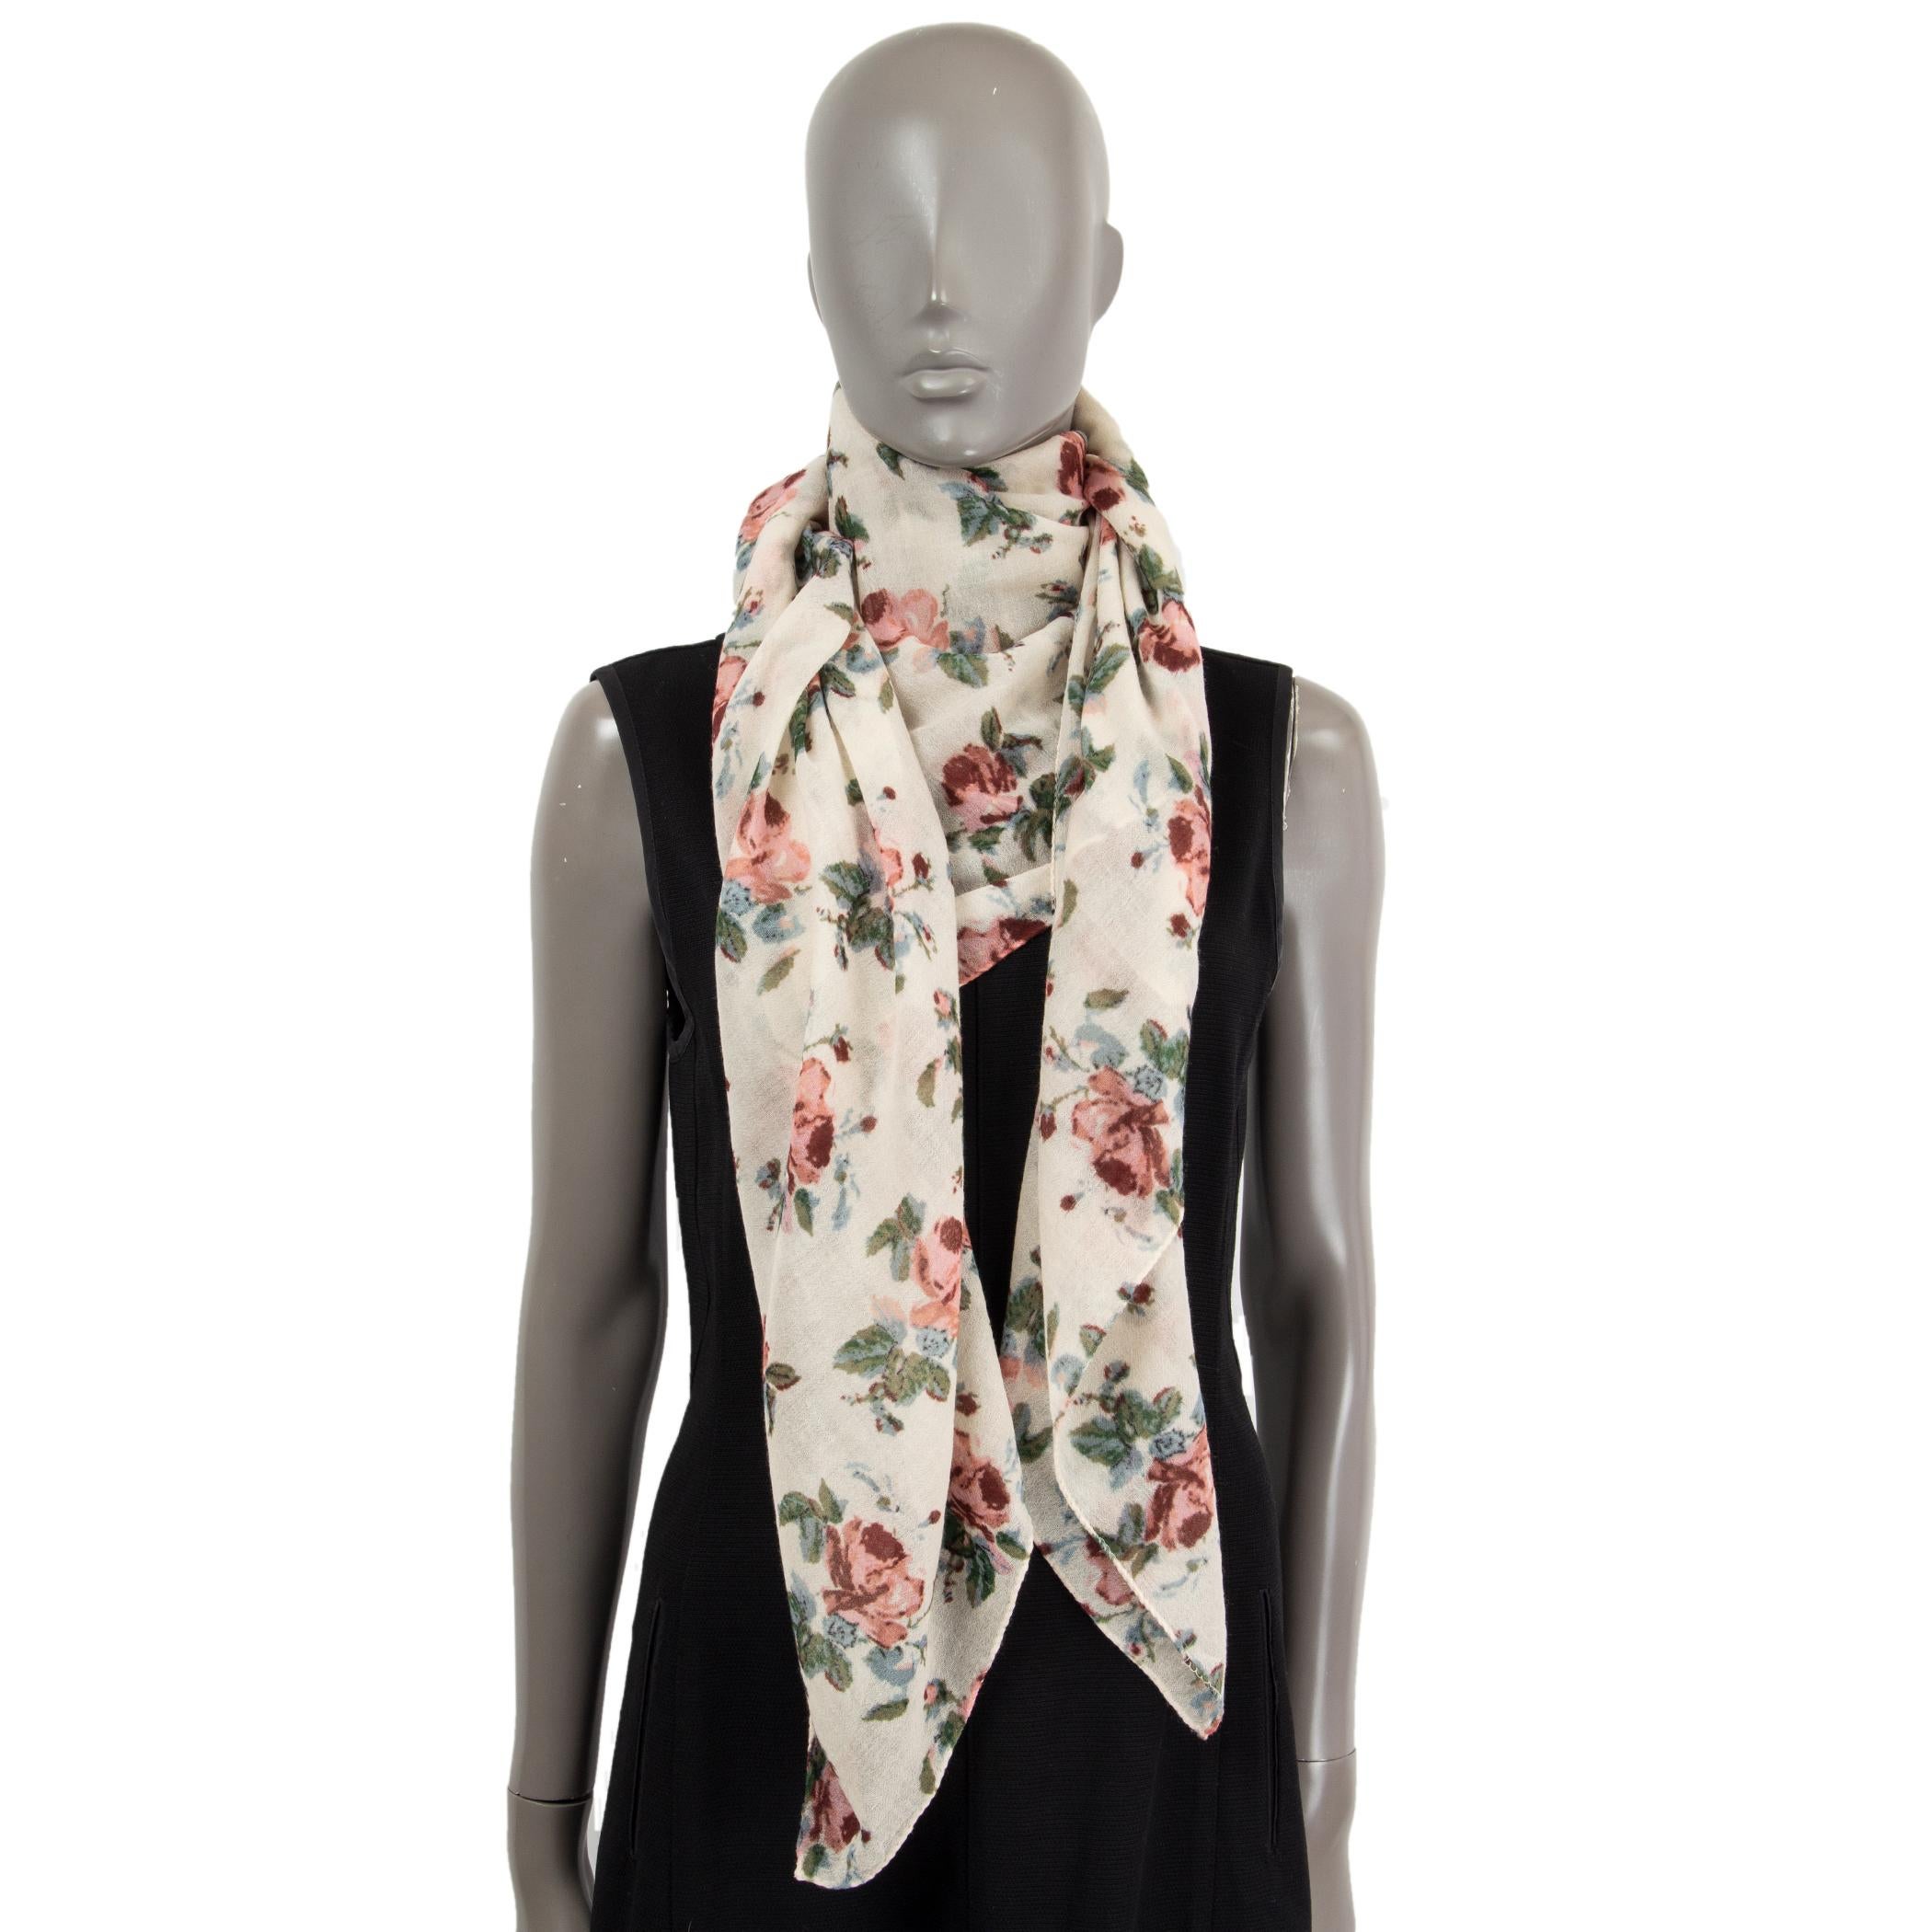 SAINT LAURENT ivory wool ROSE PRINT Shawl Scarf In Excellent Condition For Sale In Zürich, CH